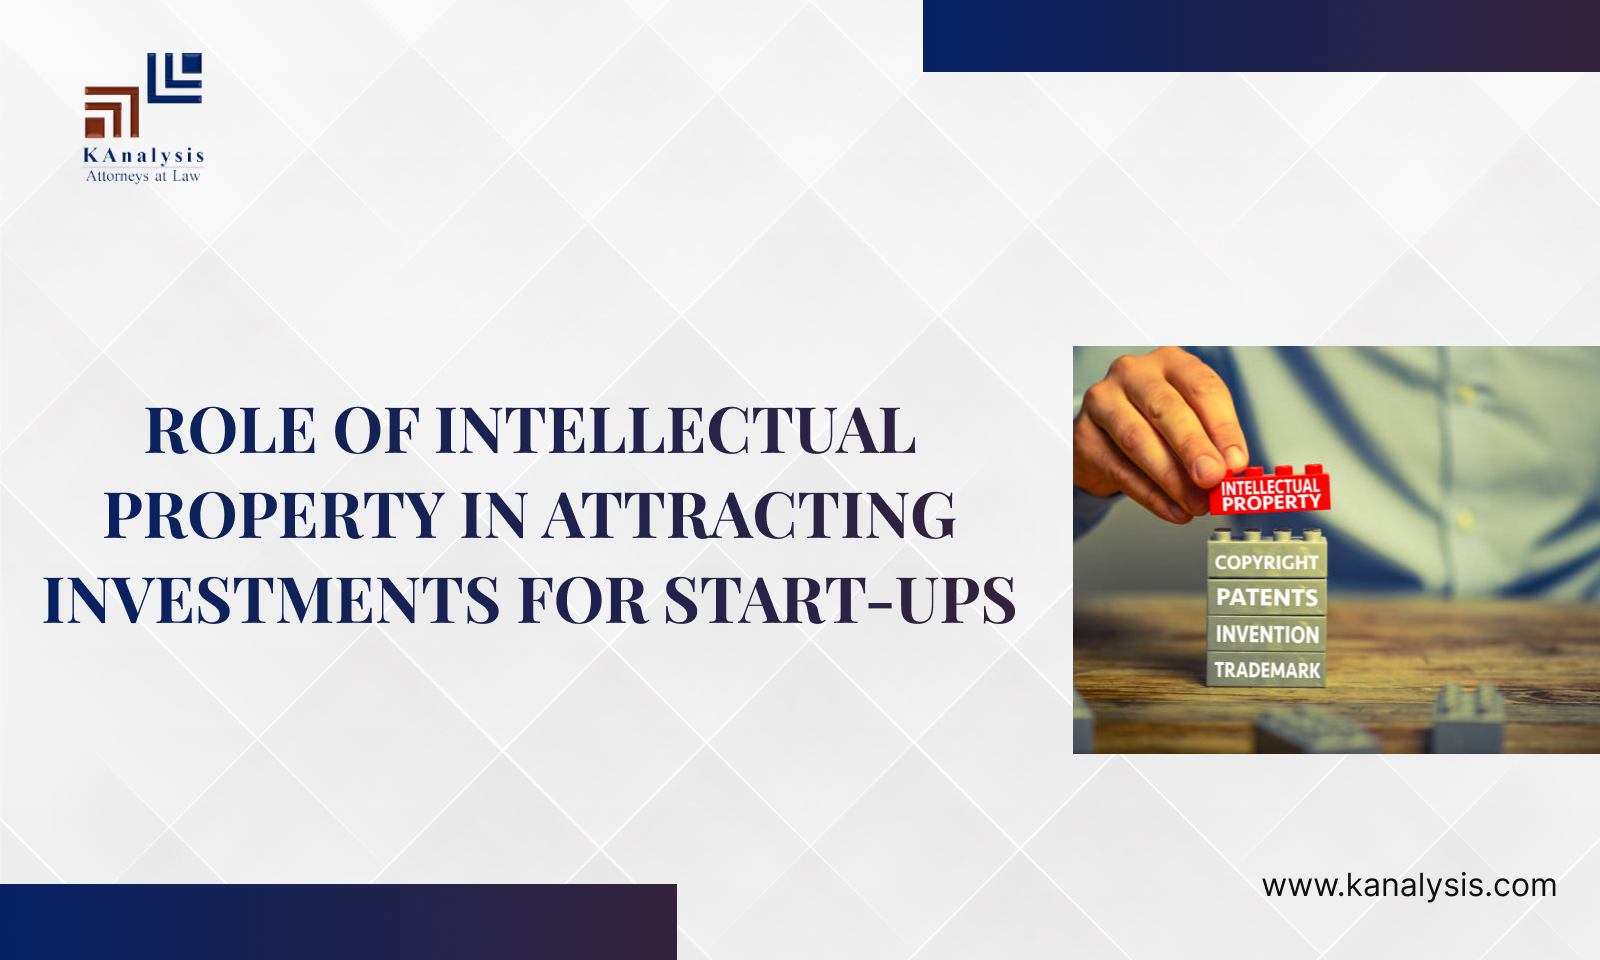 <strong>ROLE OF INTELLECTUAL PROPERTY IN ATTRACTING INVESTMENT FOR START-UPS</strong>